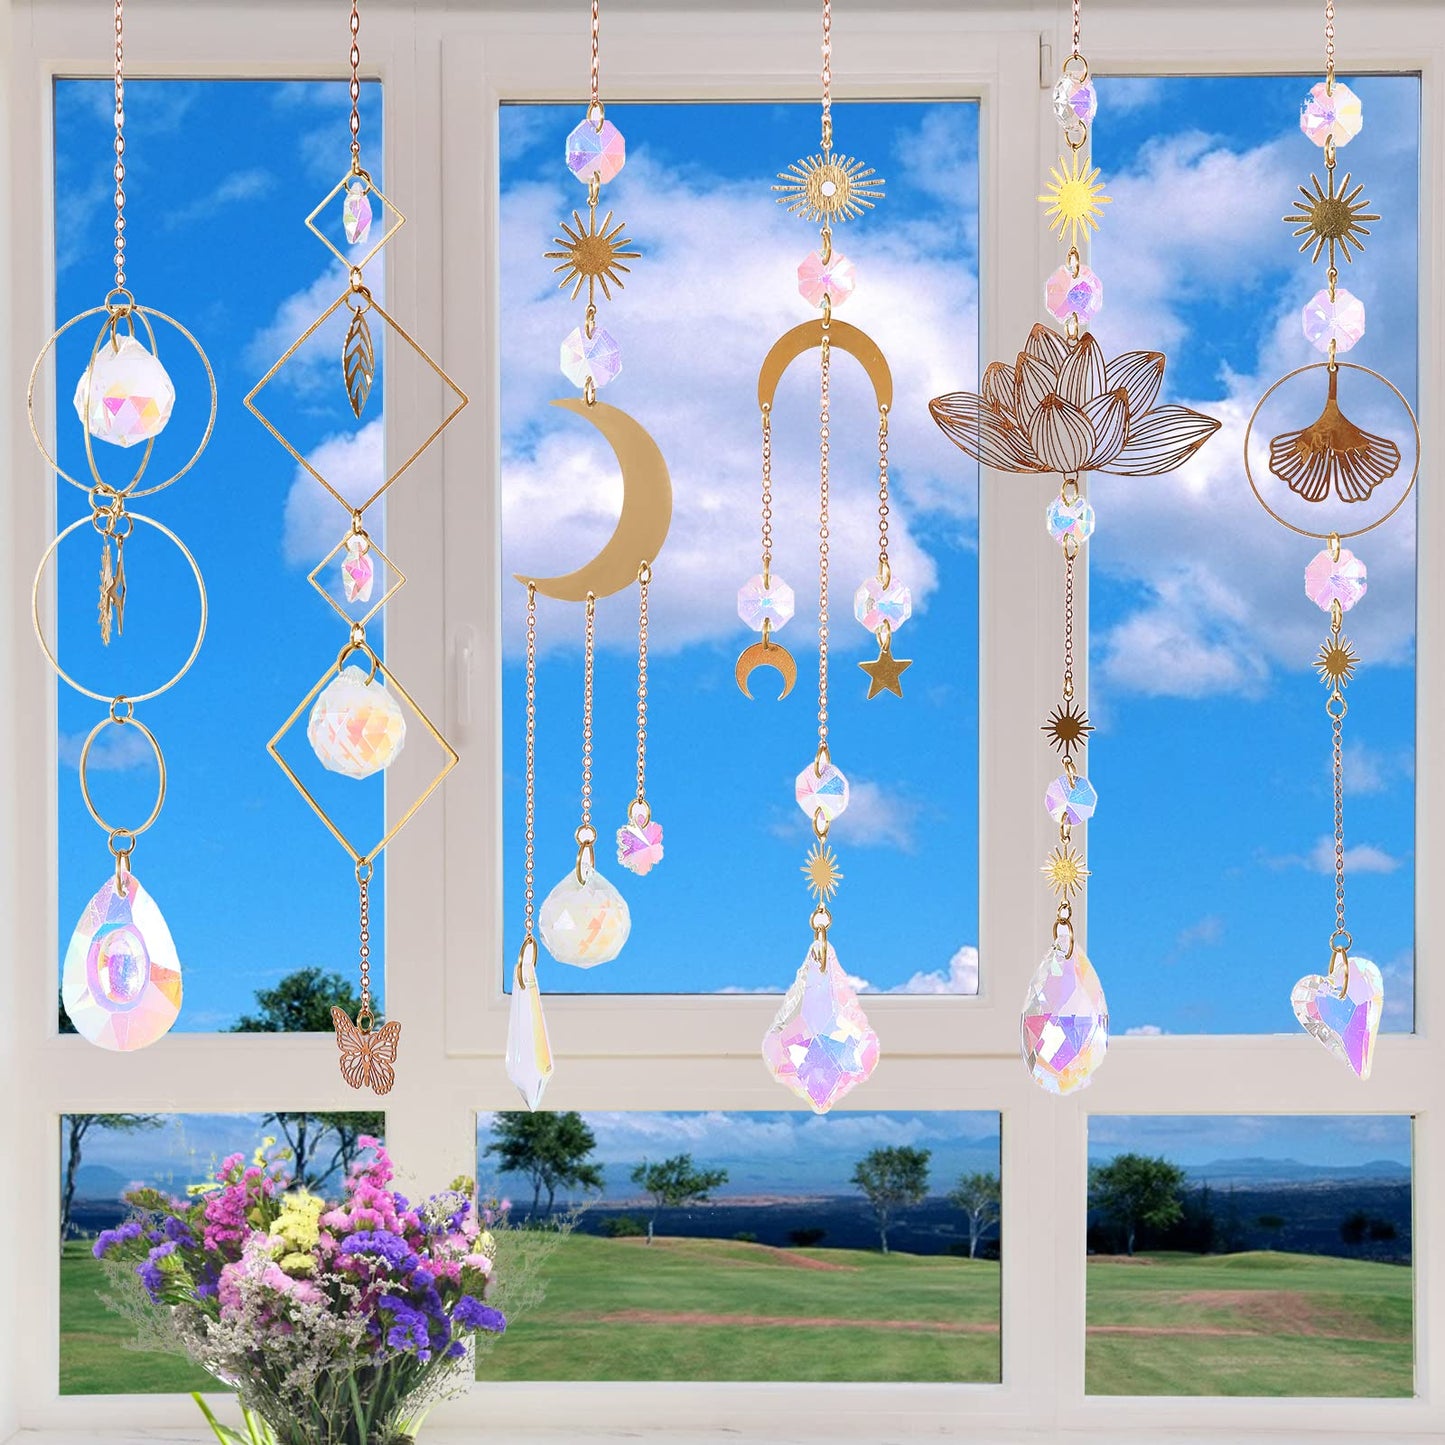 6Pieces Colorful Crystals Suncatcher Hanging for Window Crystal Ball Prism Rainbow Maker Pendants for Garden Christmas Tree Wedding Party Patio Backyard Car Home Indoor Outdoor Decoration